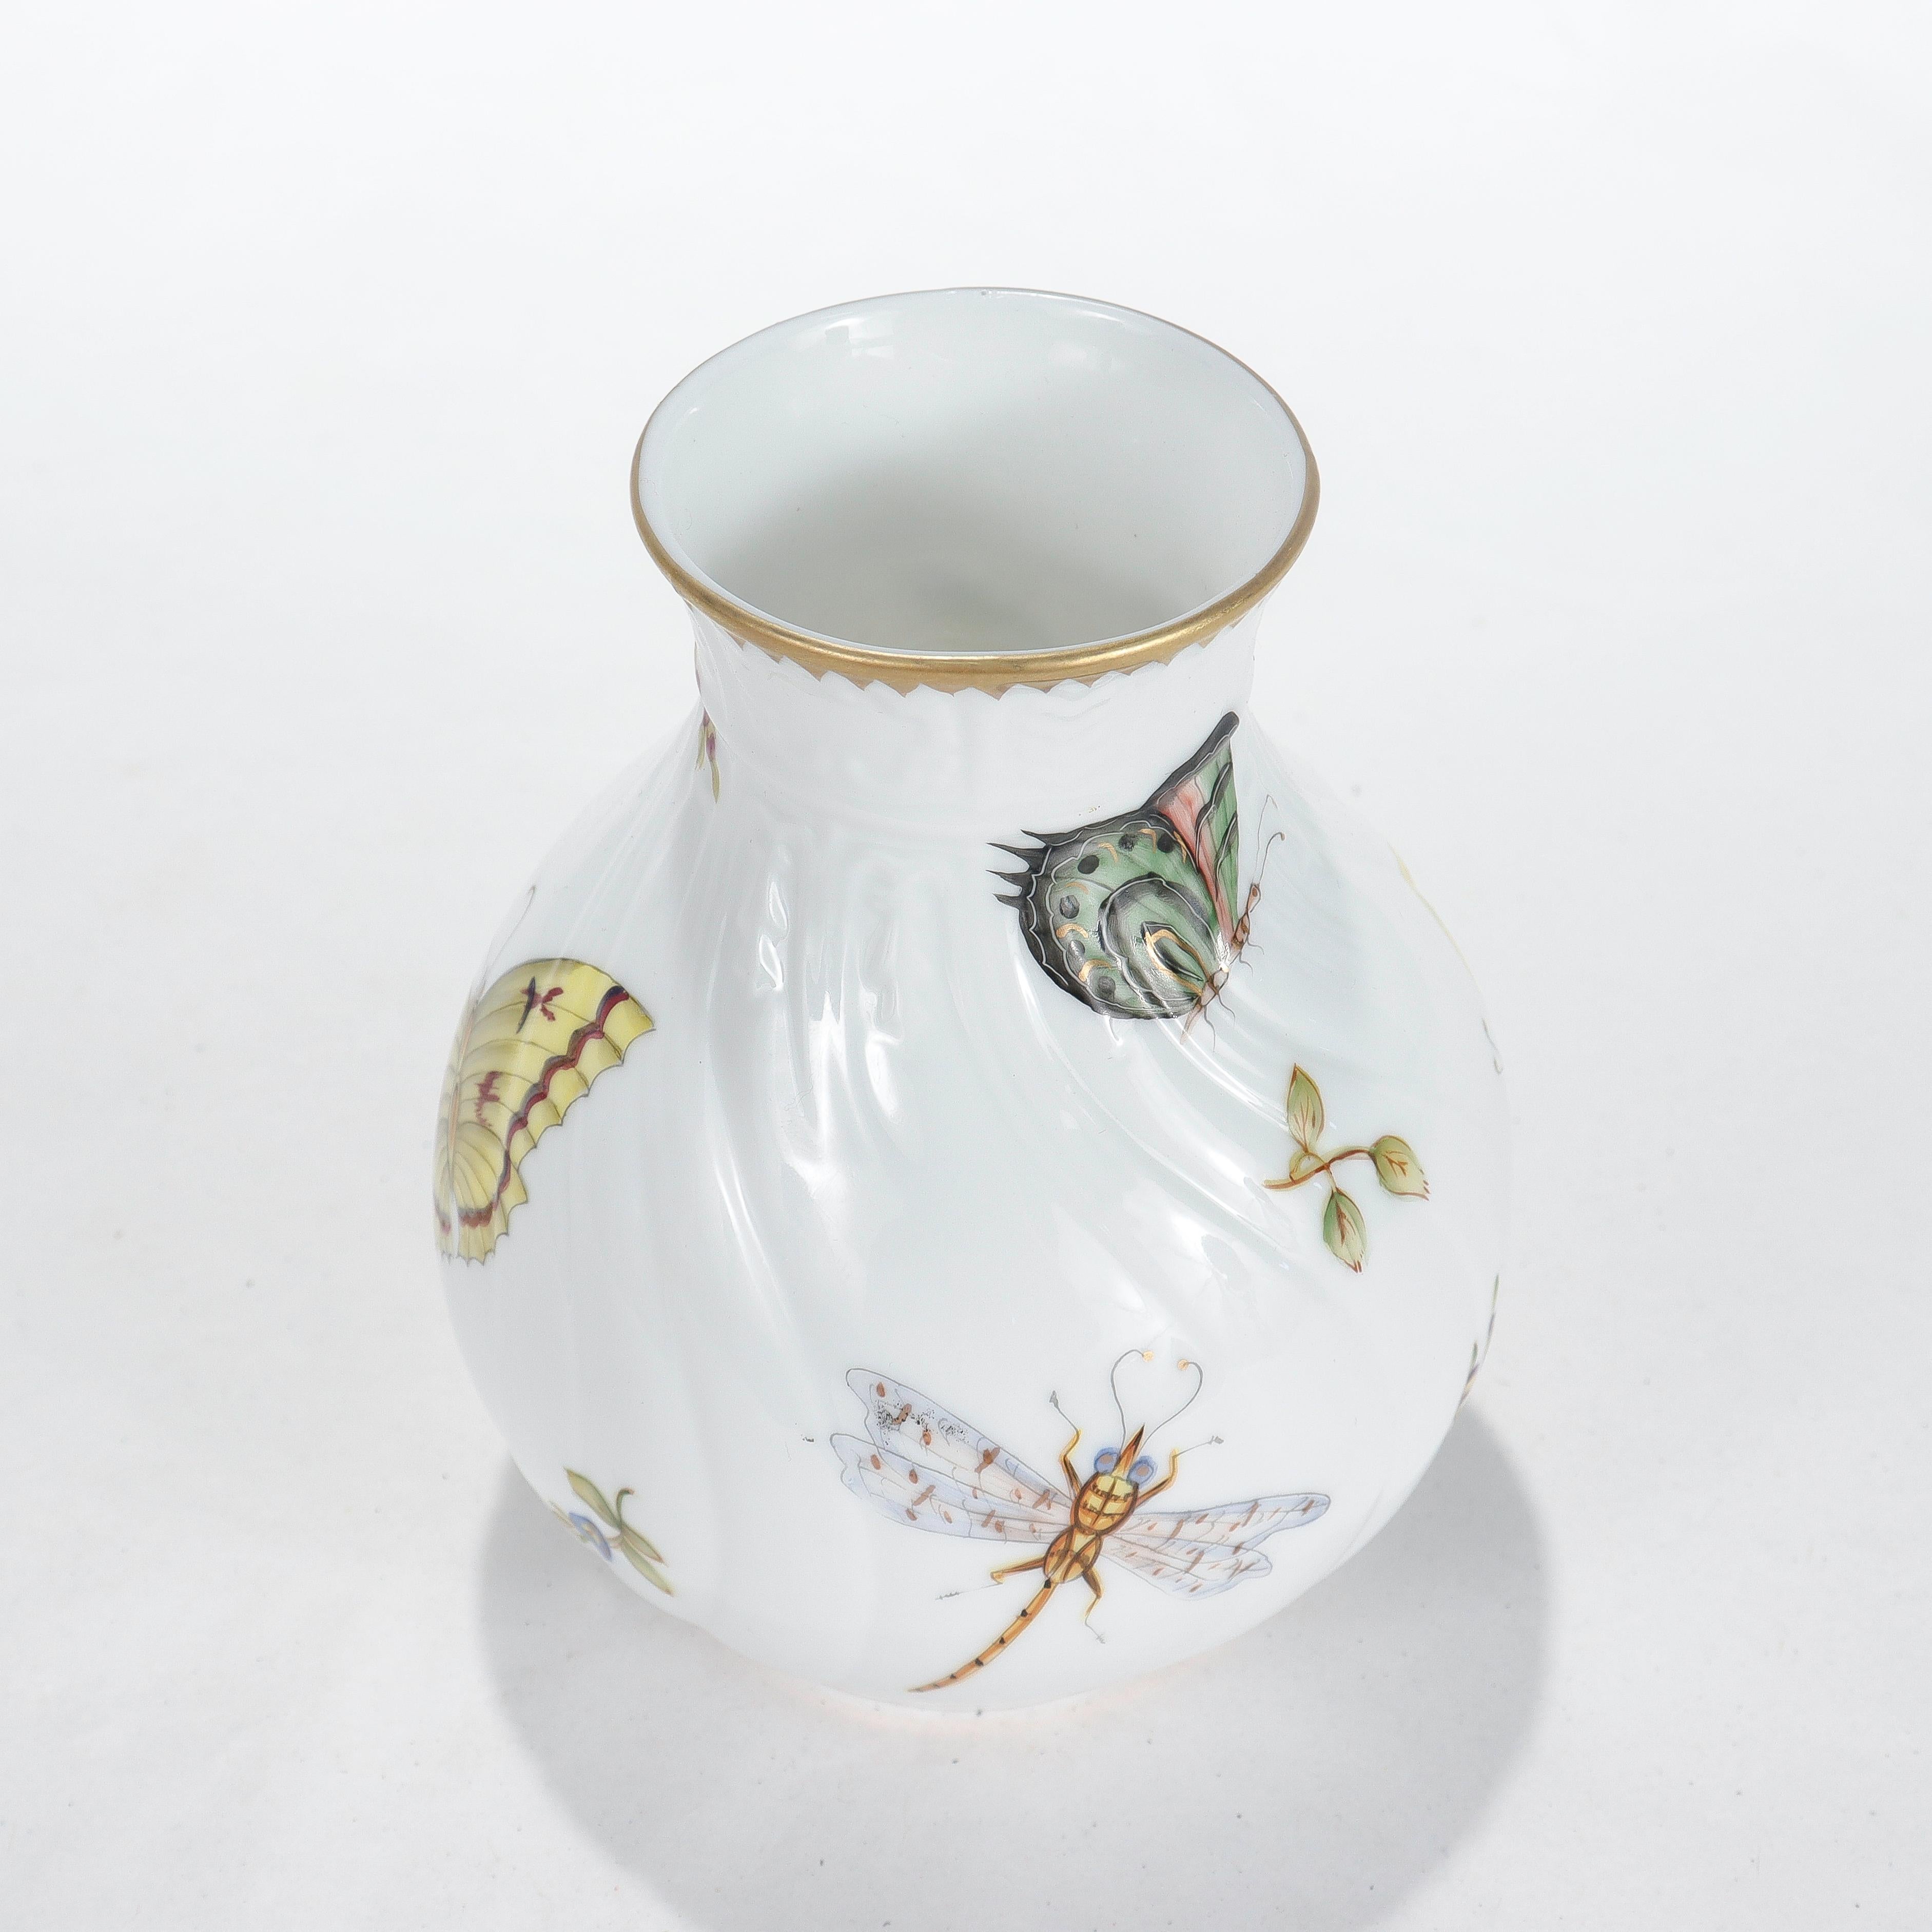 Anna Weatherley Handpainted Budapest Spring Butterfly & Dragonfly Porcelain Vase 2